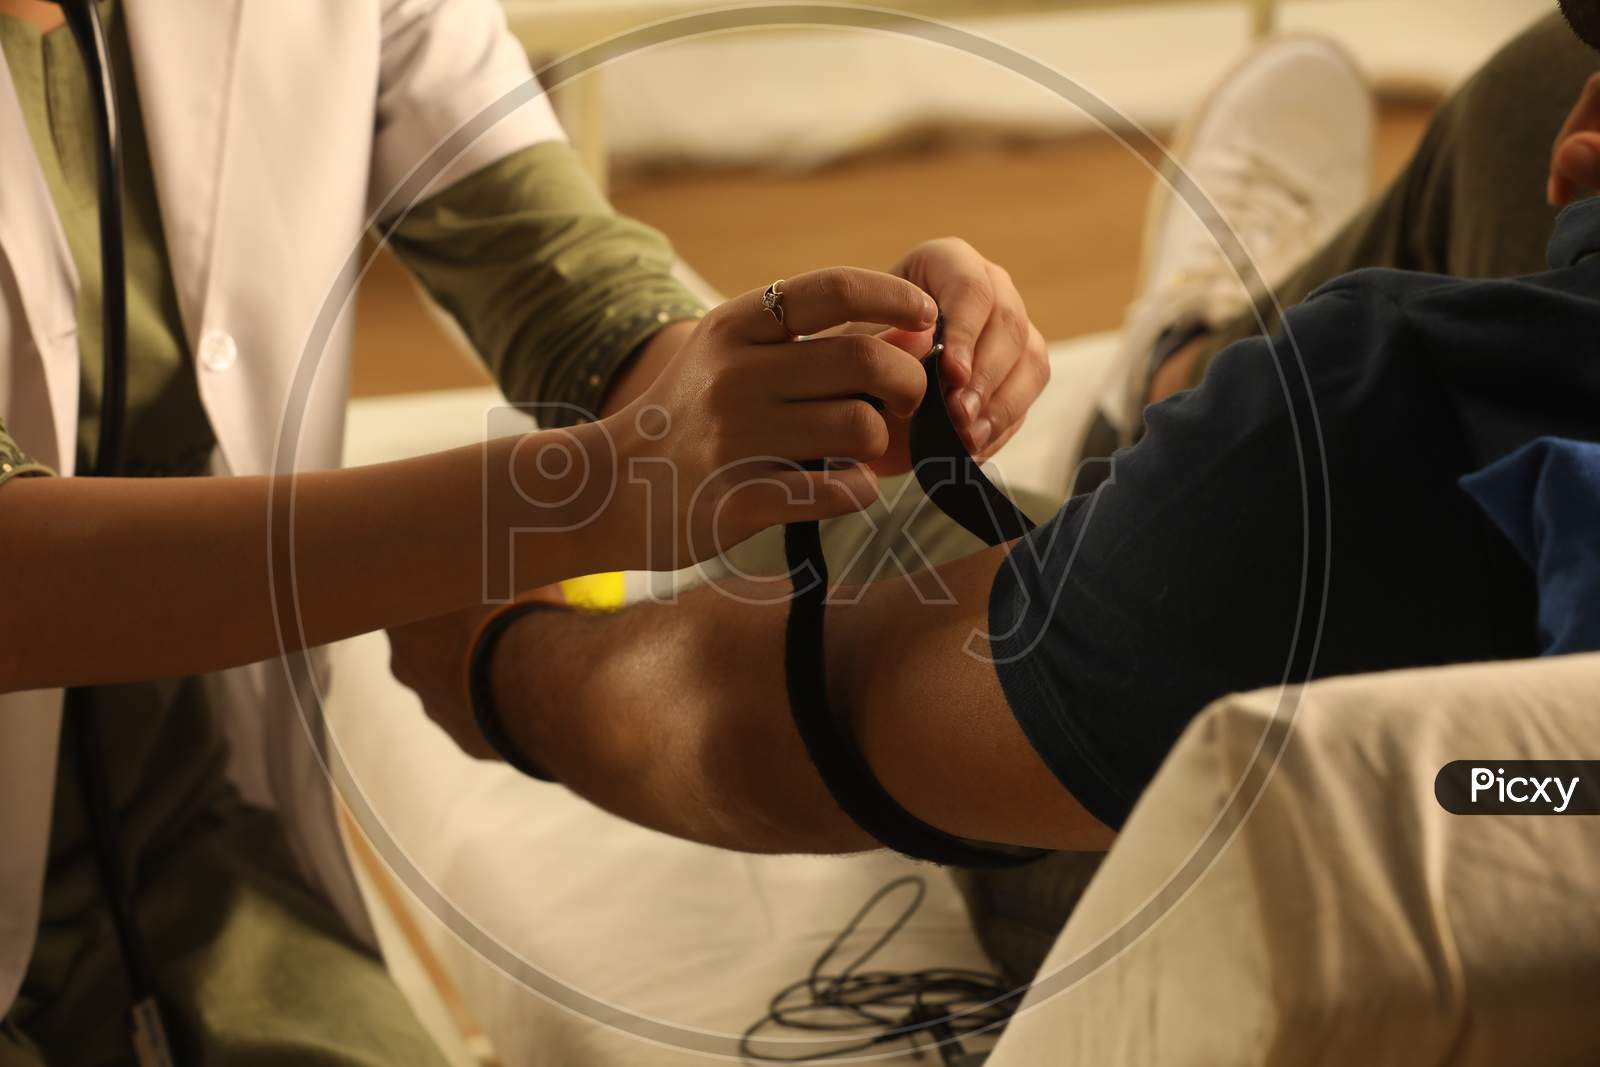 Blood Donation in an Hospital